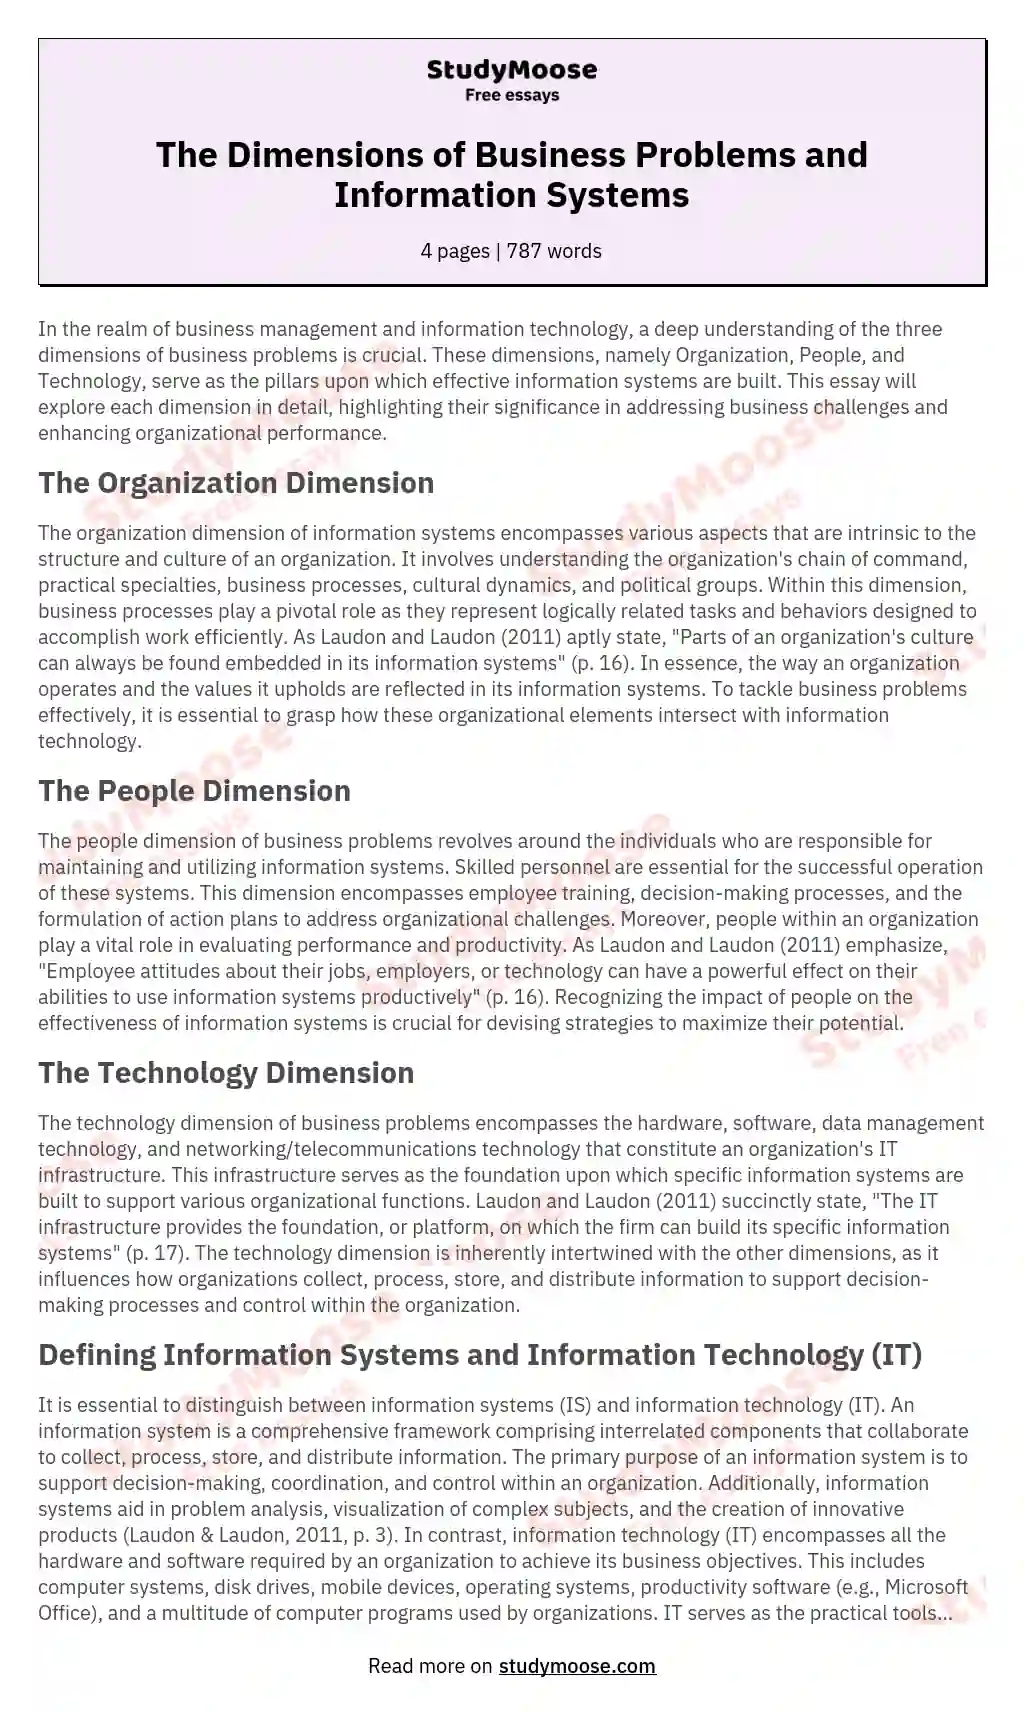 The Dimensions of Business Problems and Information Systems essay